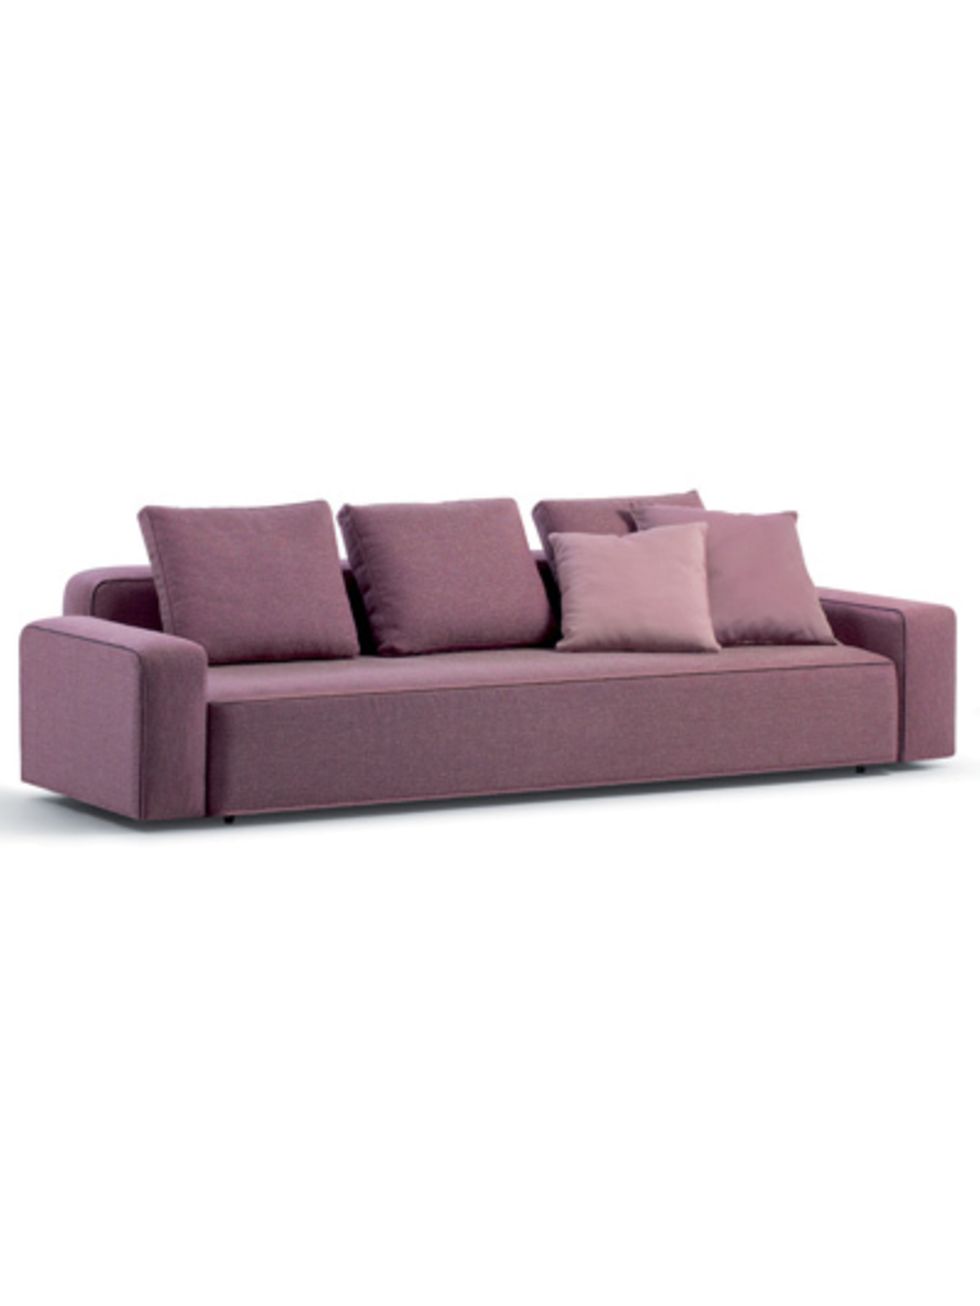 Brown, Couch, Furniture, Rectangle, Maroon, Living room, studio couch, Beige, Cushion, Pillow, 